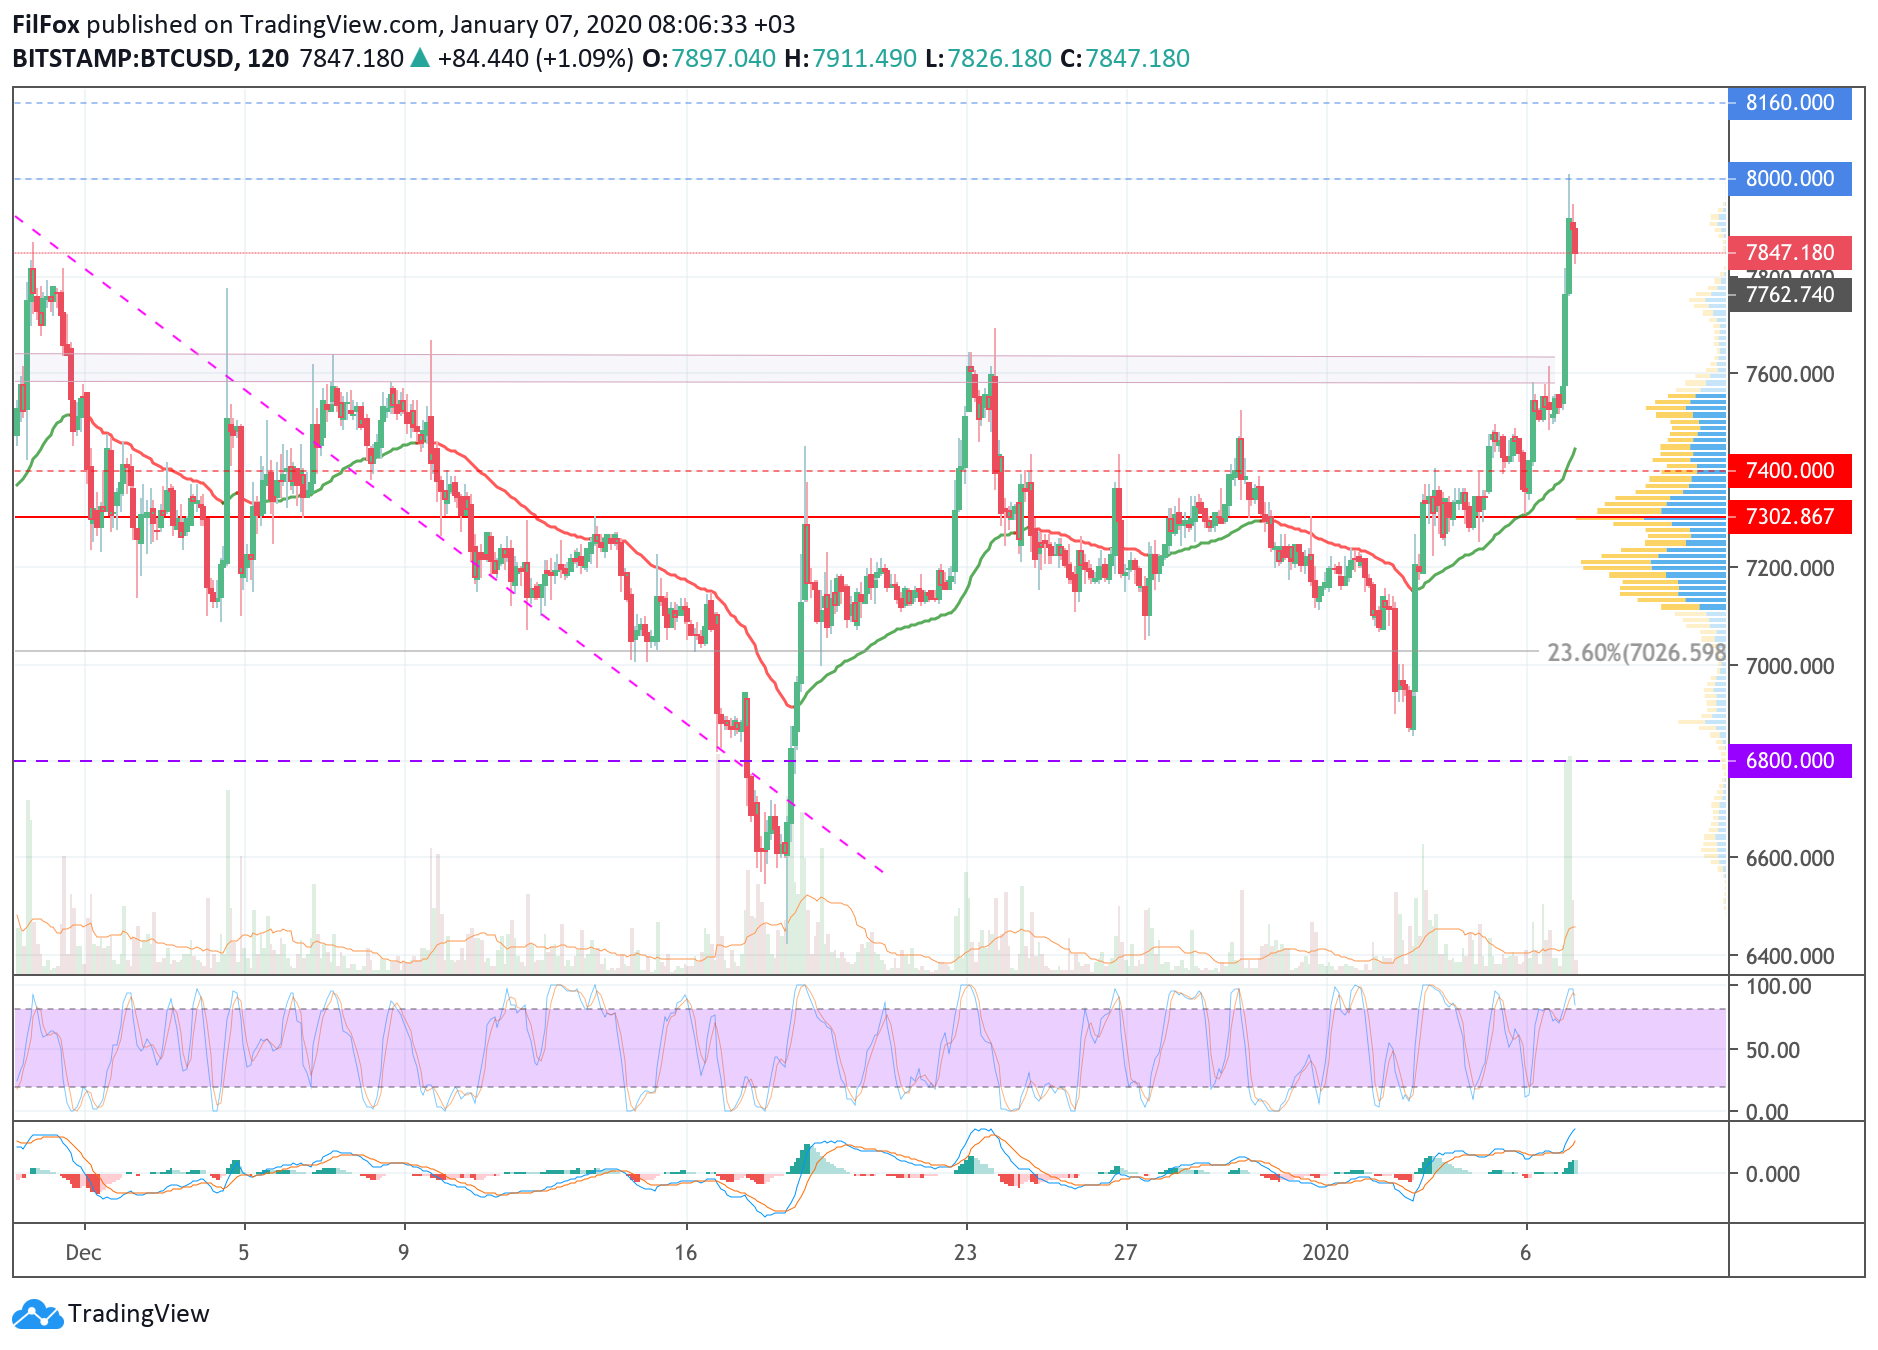 Analysis of cryptocurrency pairs BTC / USD, ETH / USD and XRP / USD on 01/07/2020